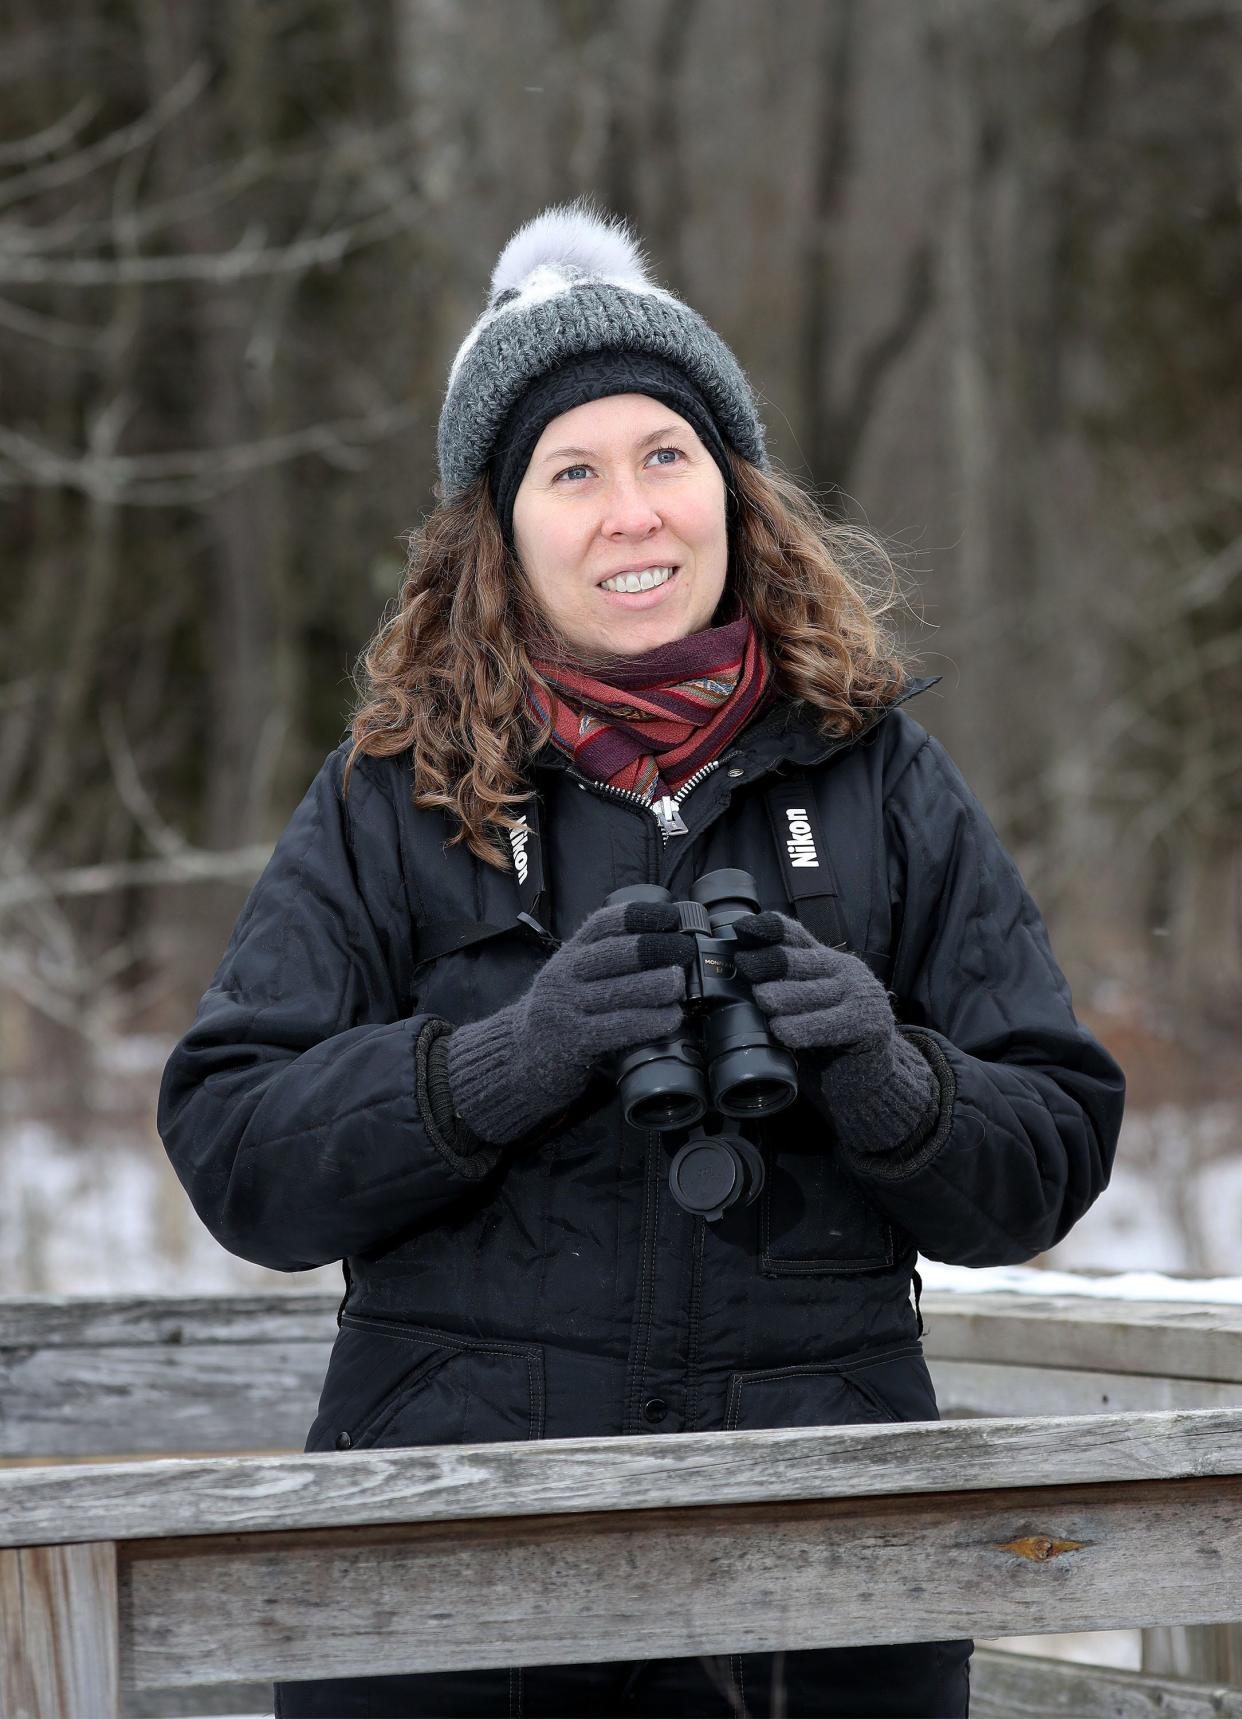 Rebecca Jabs, a Manitowoc artist/graphic designer who collaborated with author/naturalist John Bates on a guidebook called "Wisconsin's Wild Lakes," looks for birds along the Woodland Dunes area, Monday, January 17, 2022, in Manitowoc, Wis.